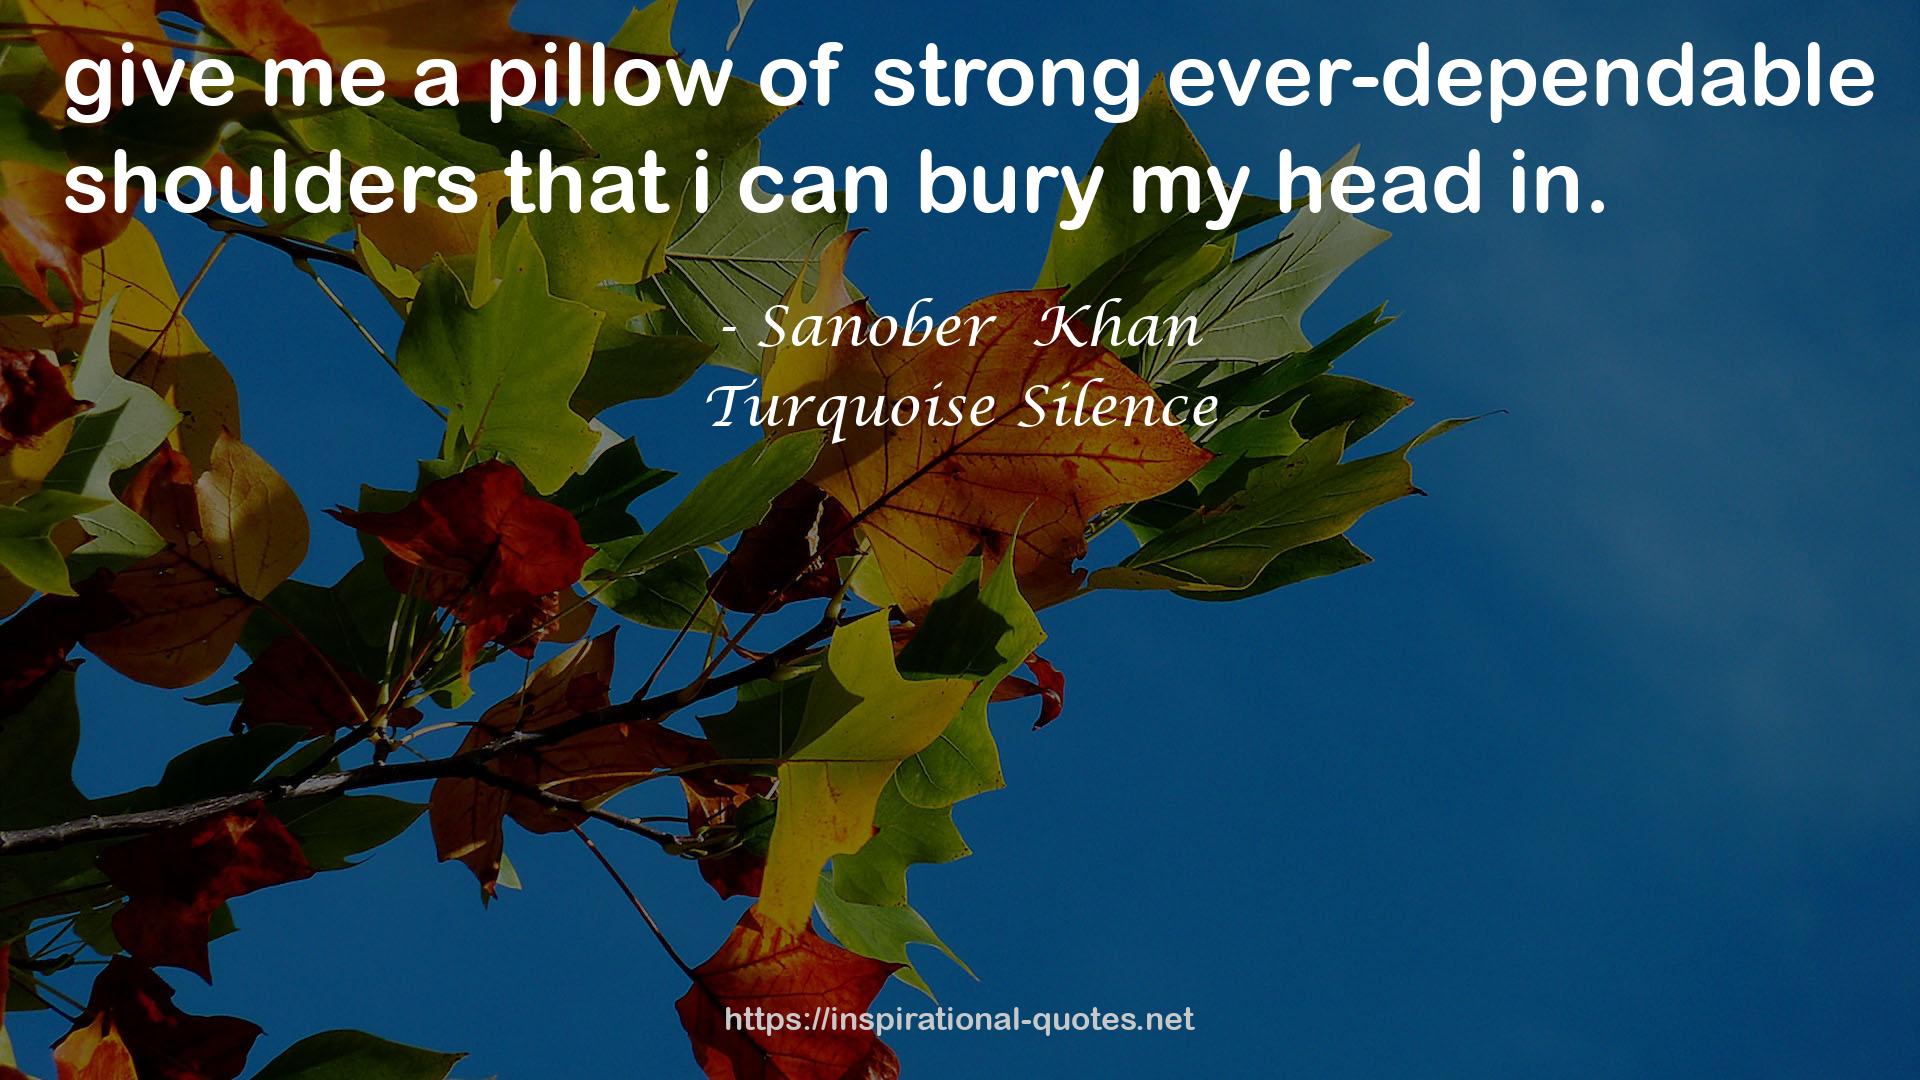 mea pillow  QUOTES